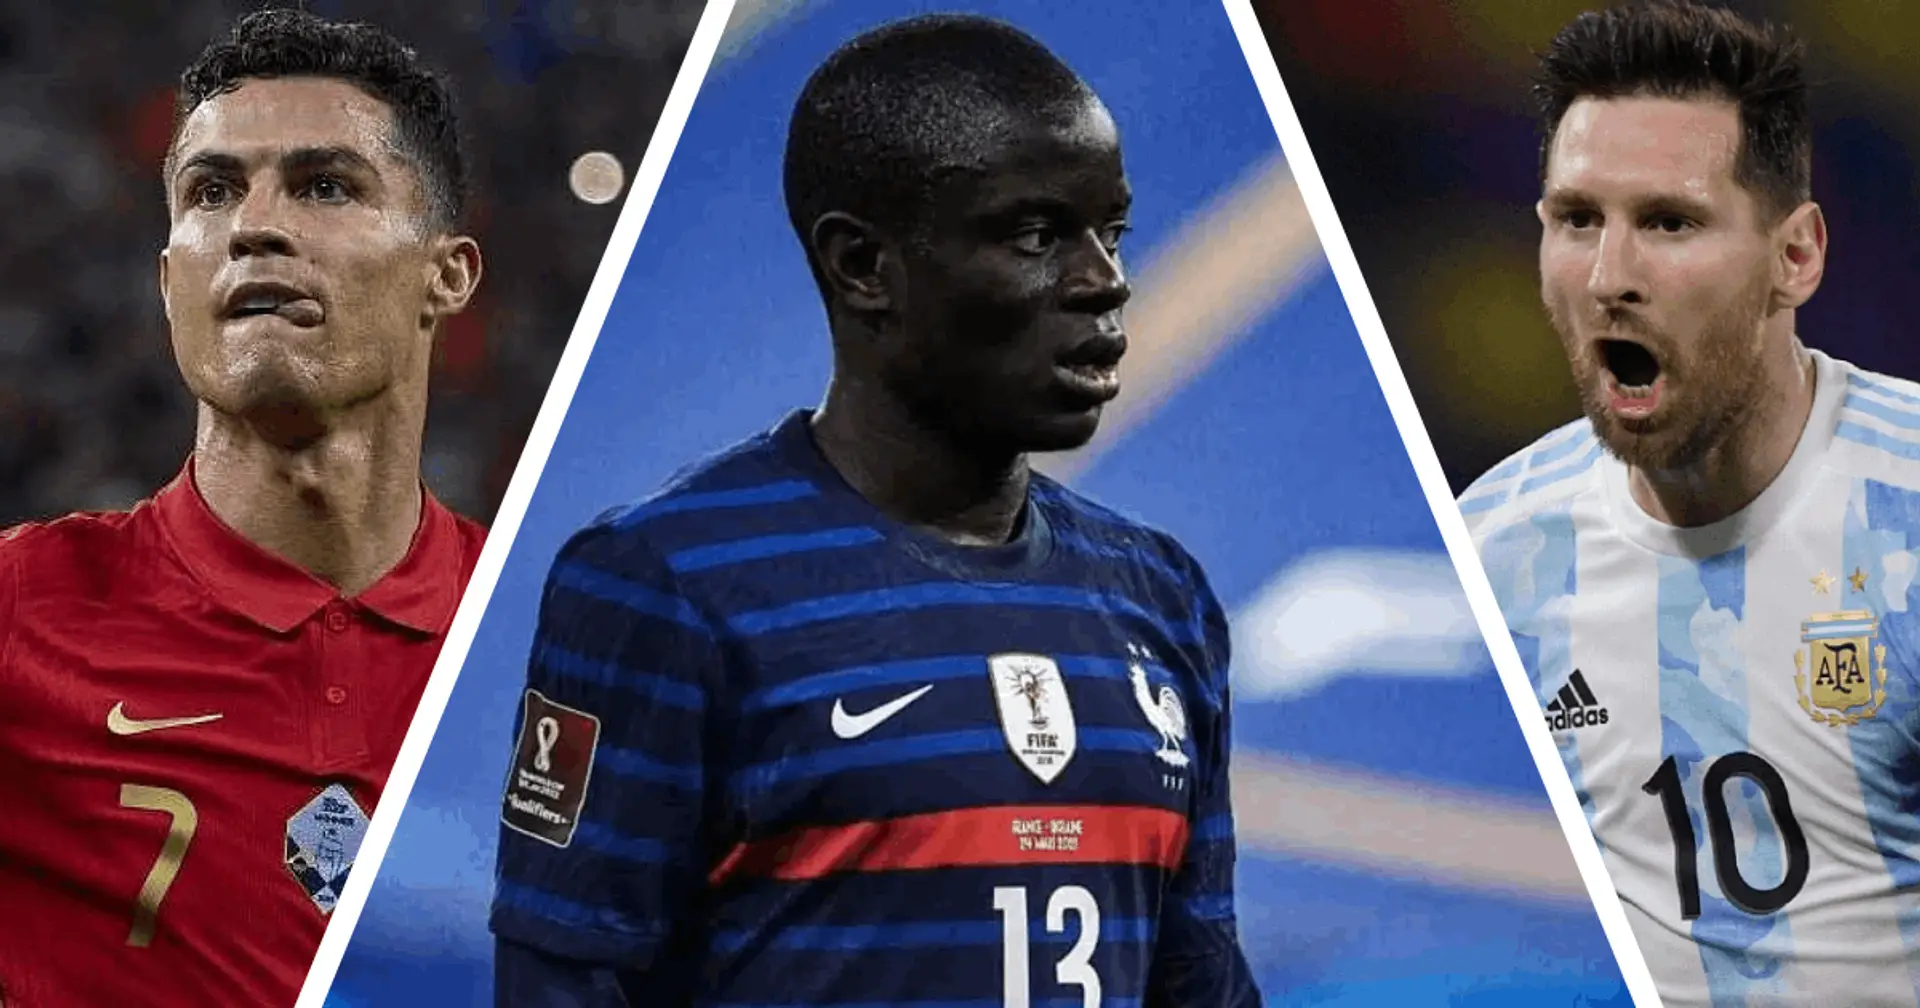 No Gunners in top 10 as Kante still leads the race: updated Ballon d'Or power rankings after France defeat at Euro 2020